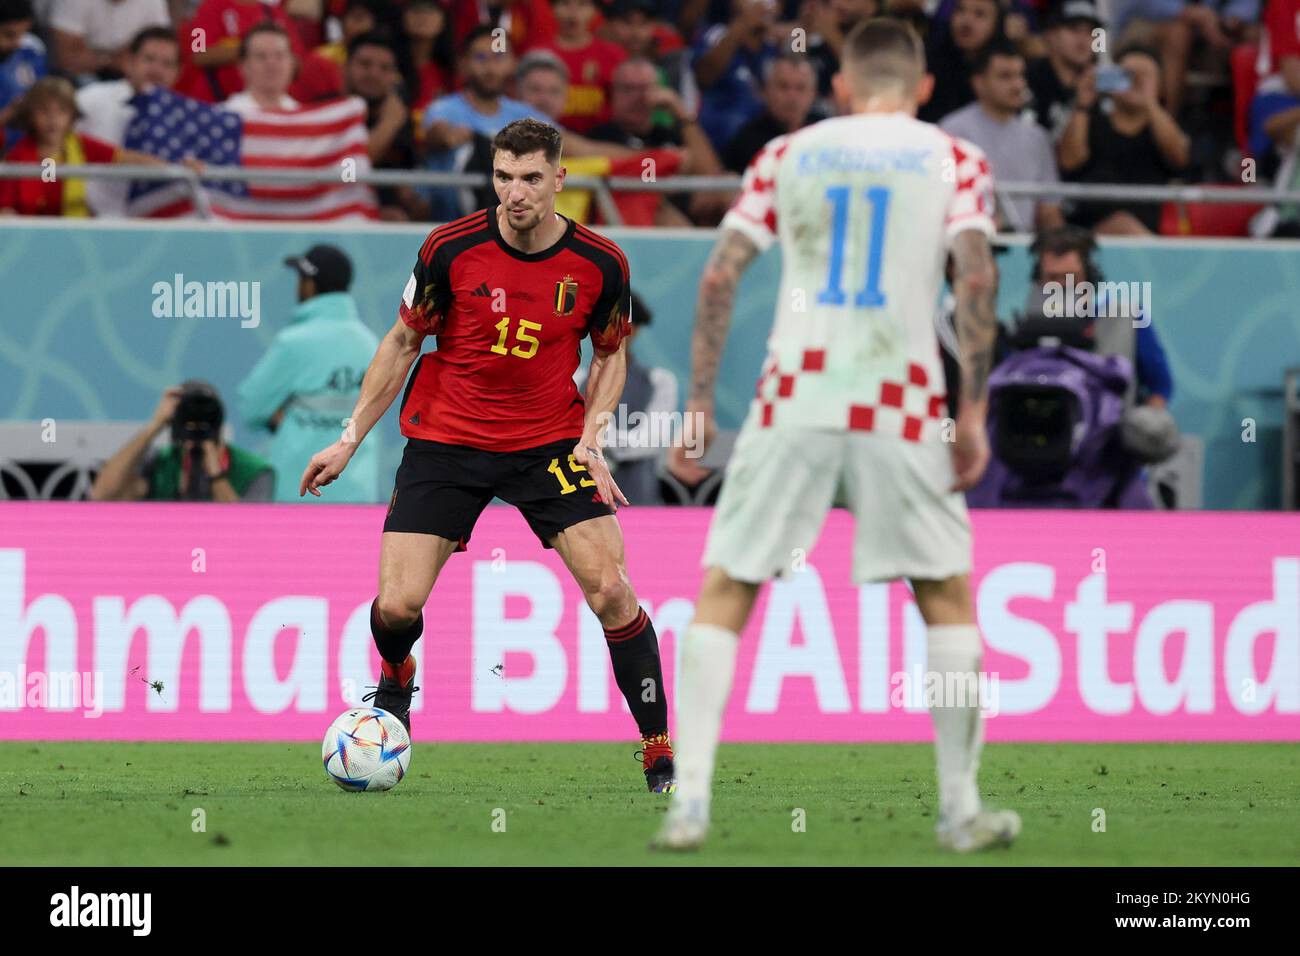 Doha, Qatar, 01/12/2022, Belgium's Thomas Meunier and Croatian Marcelo Brozovic pictured in action during a soccer game between Belgium's national team the Red Devils and Croatia, the third and last game in Group F of the FIFA 2022 World Cup in Al Rayyan, State of Qatar on Thursday 01 December 2022. BELGA PHOTO BRUNO FAHY Credit: Belga News Agency/Alamy Live News Stock Photo